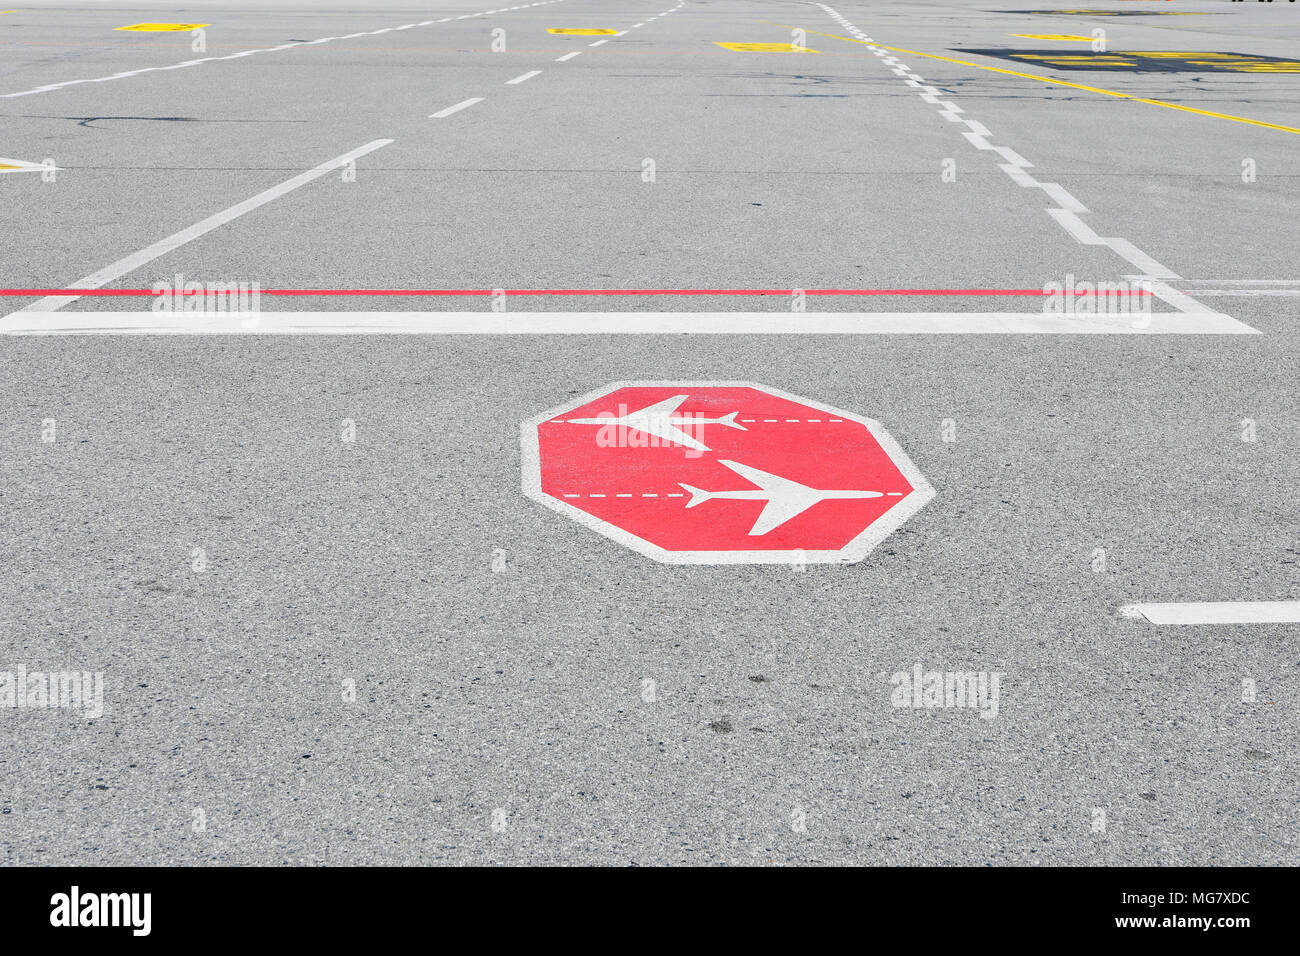 stop, stopp, sign, mark, 2, two, aircrafts, crossing, Airfield, Aircraft crossing, Aircraft, Airplane, Plane, Airport Munich, MUC, Germany, Stock Photo